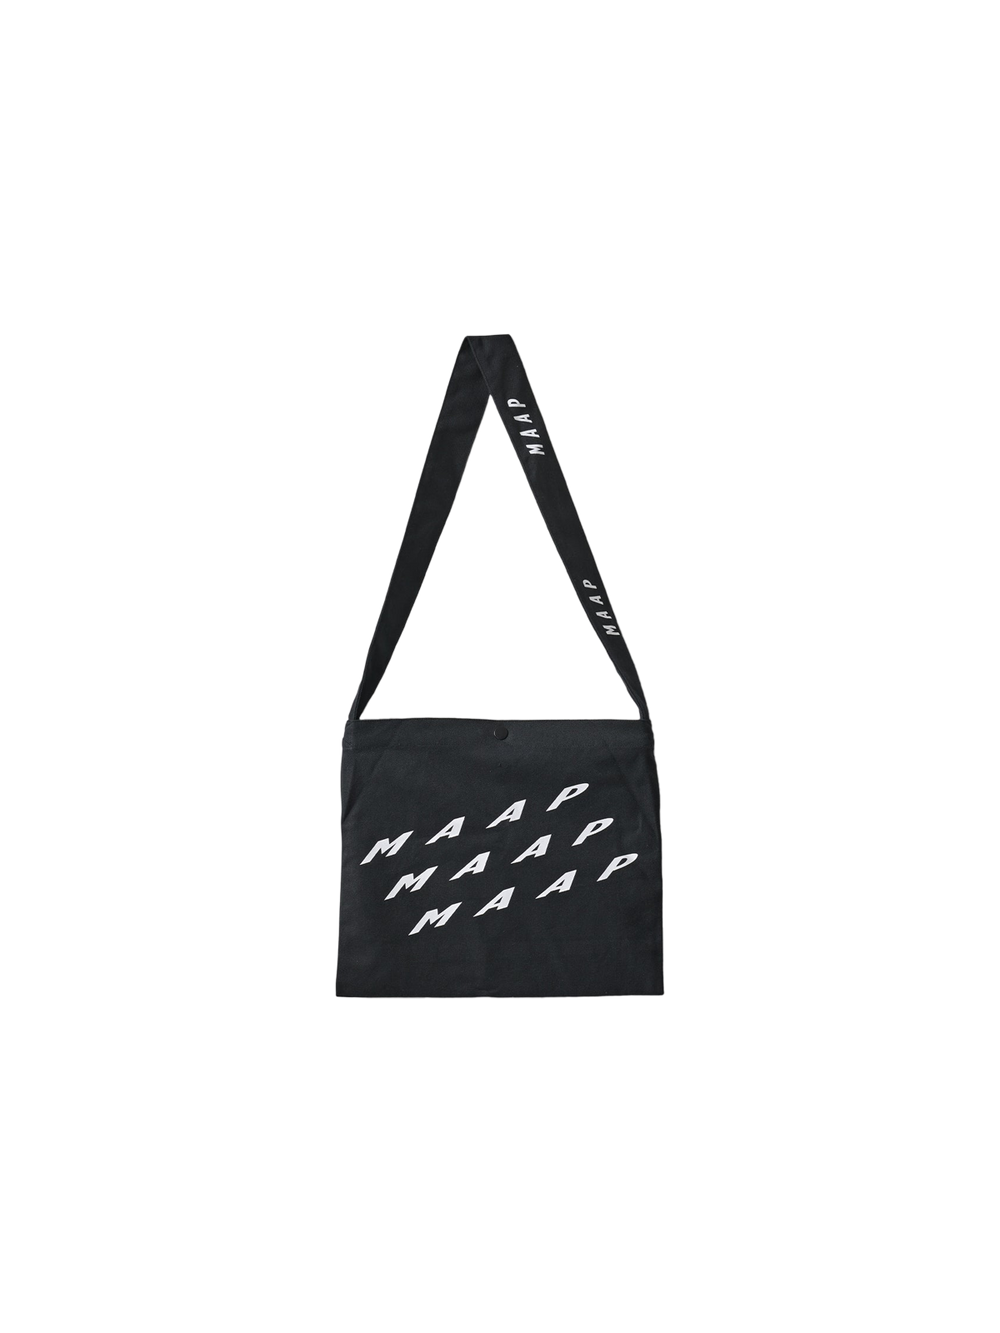 Product Image for Evade Musette